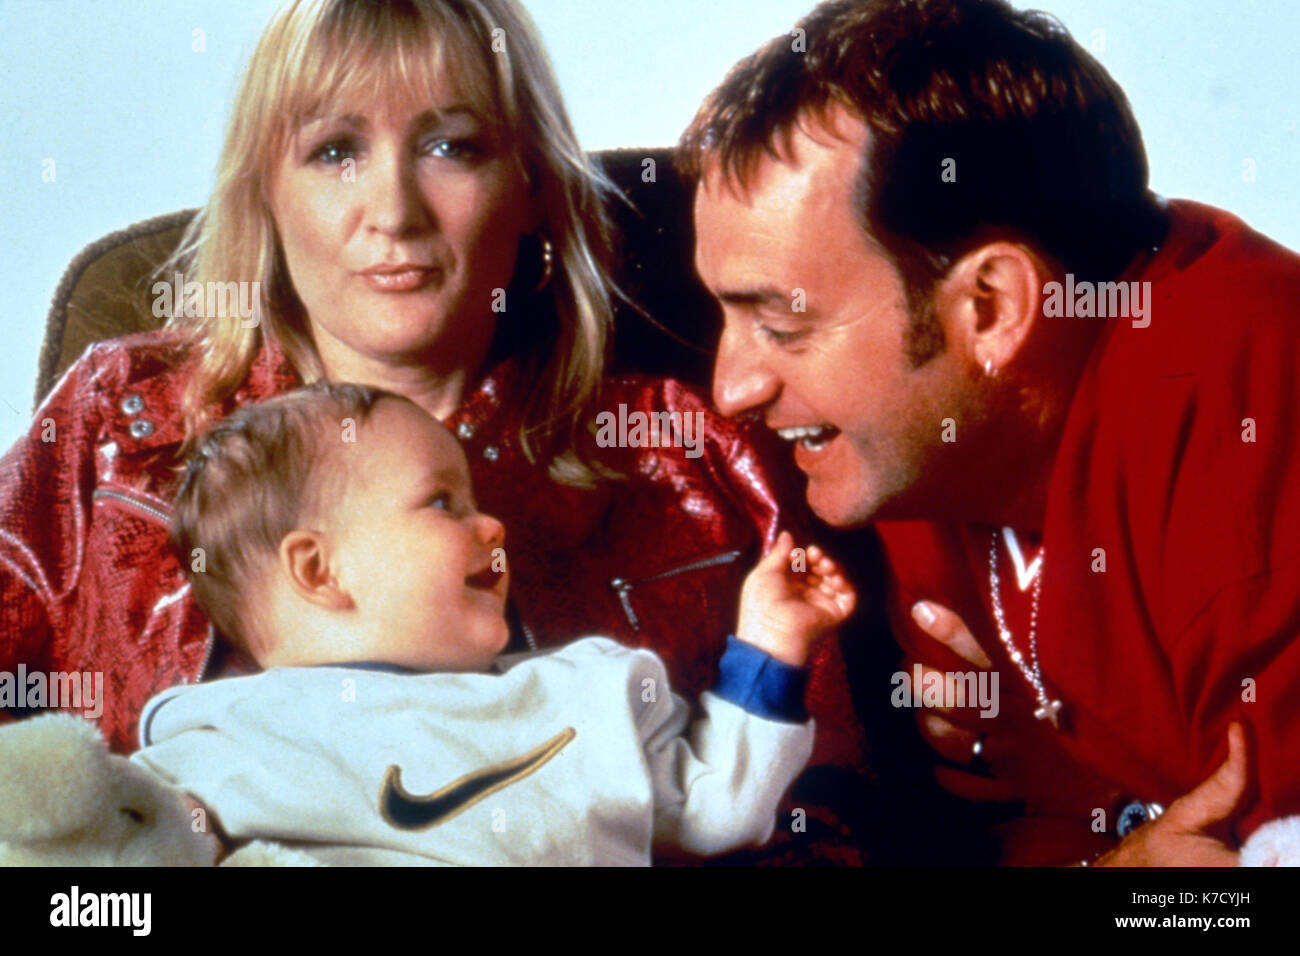 Photo Must Be Credited ©Alpha Press 070000 (2000) Caroline Aherne as Denise Best and Craig Cash as Dave Best with Baby David Best in The Royle Family BBC TV Show. Stock Photo